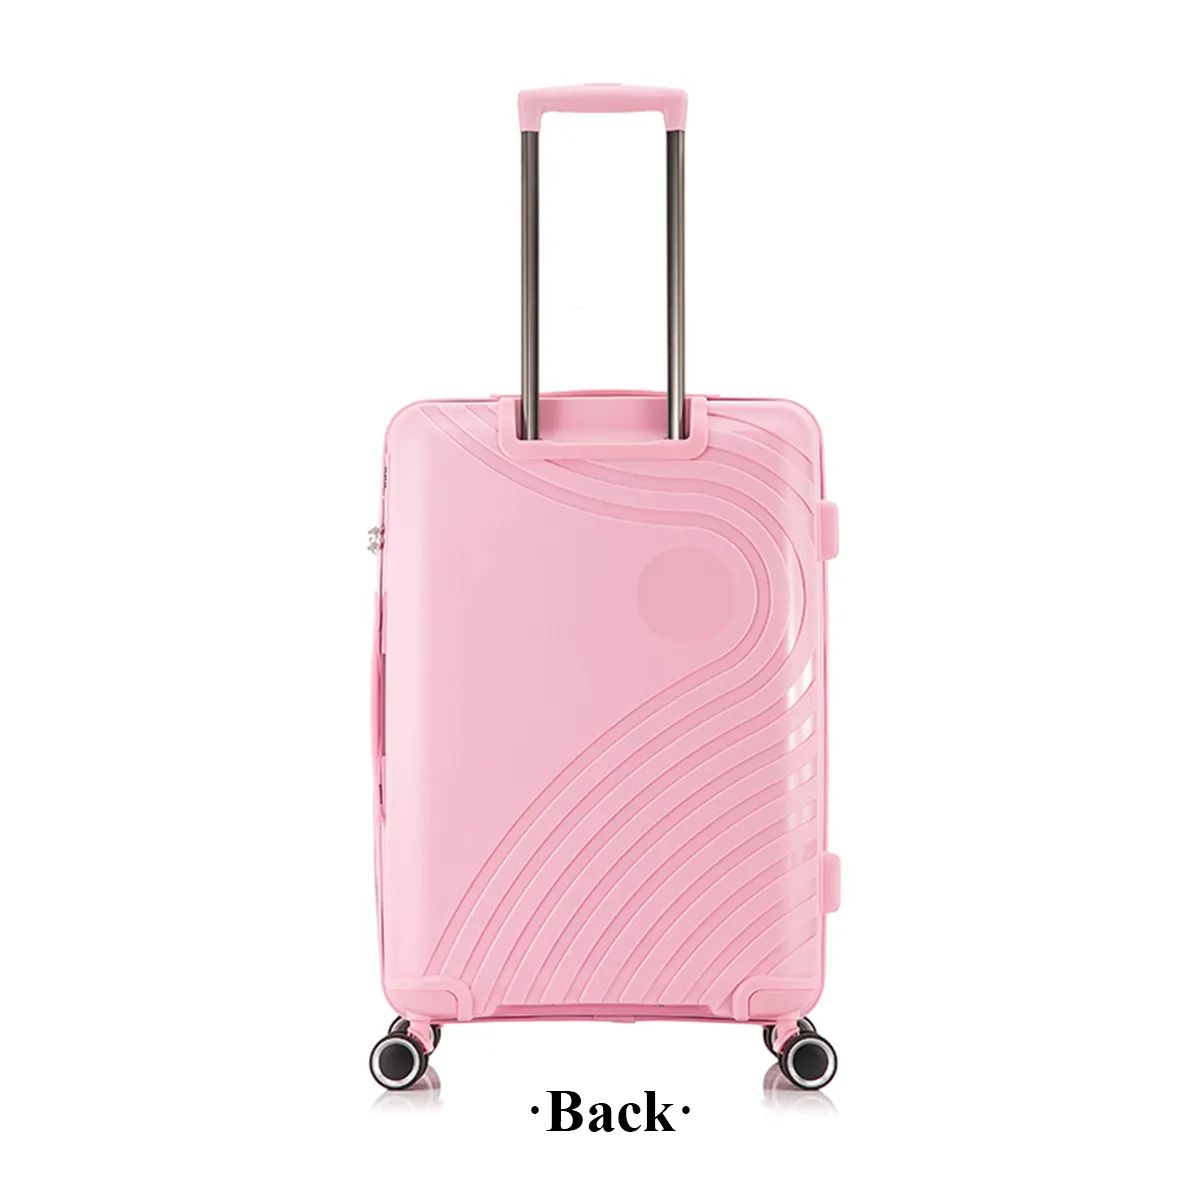 SUPER LIGHT WEIGHT LUGGAGE PP SUITCASE CARRY ON LUGGAGE TRAVEL BAG LUGGAGE